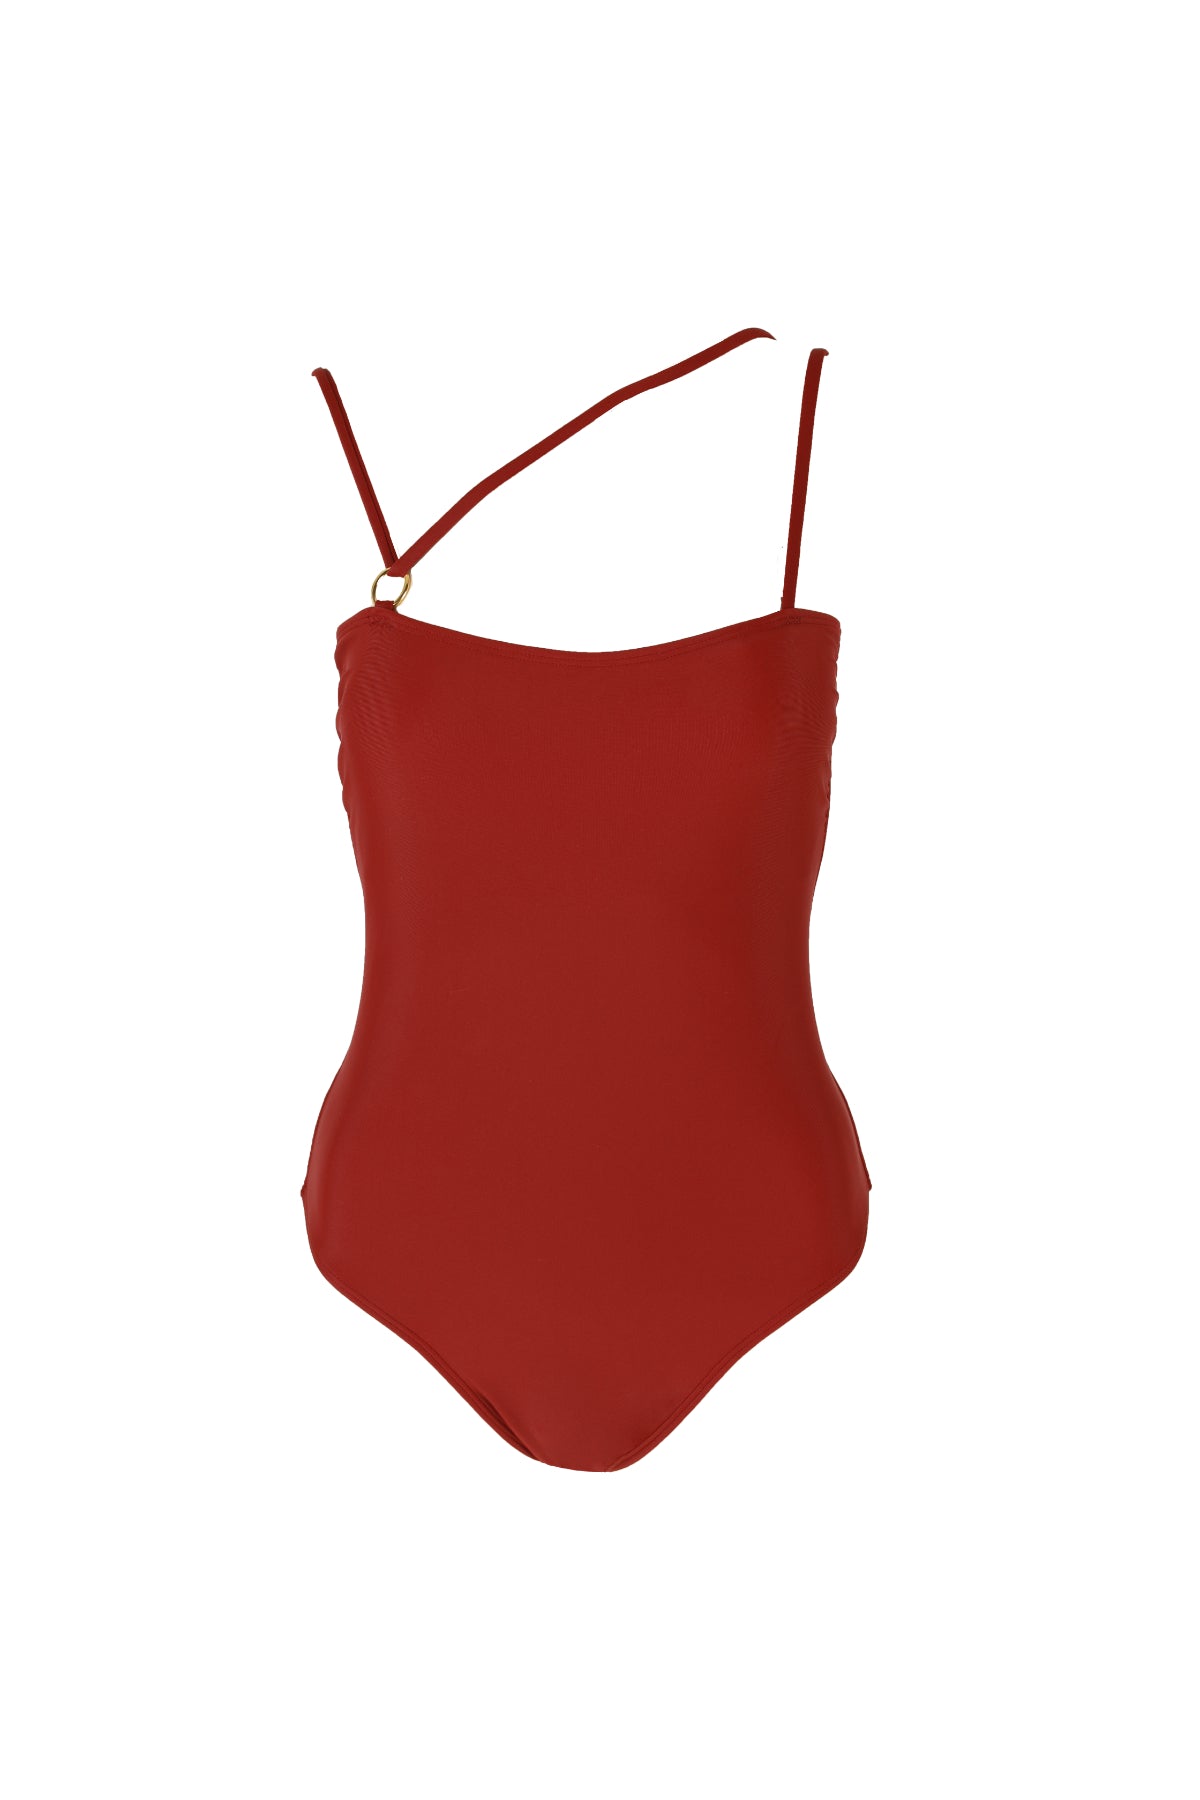 The Best One-Piece Swimsuits to Buy